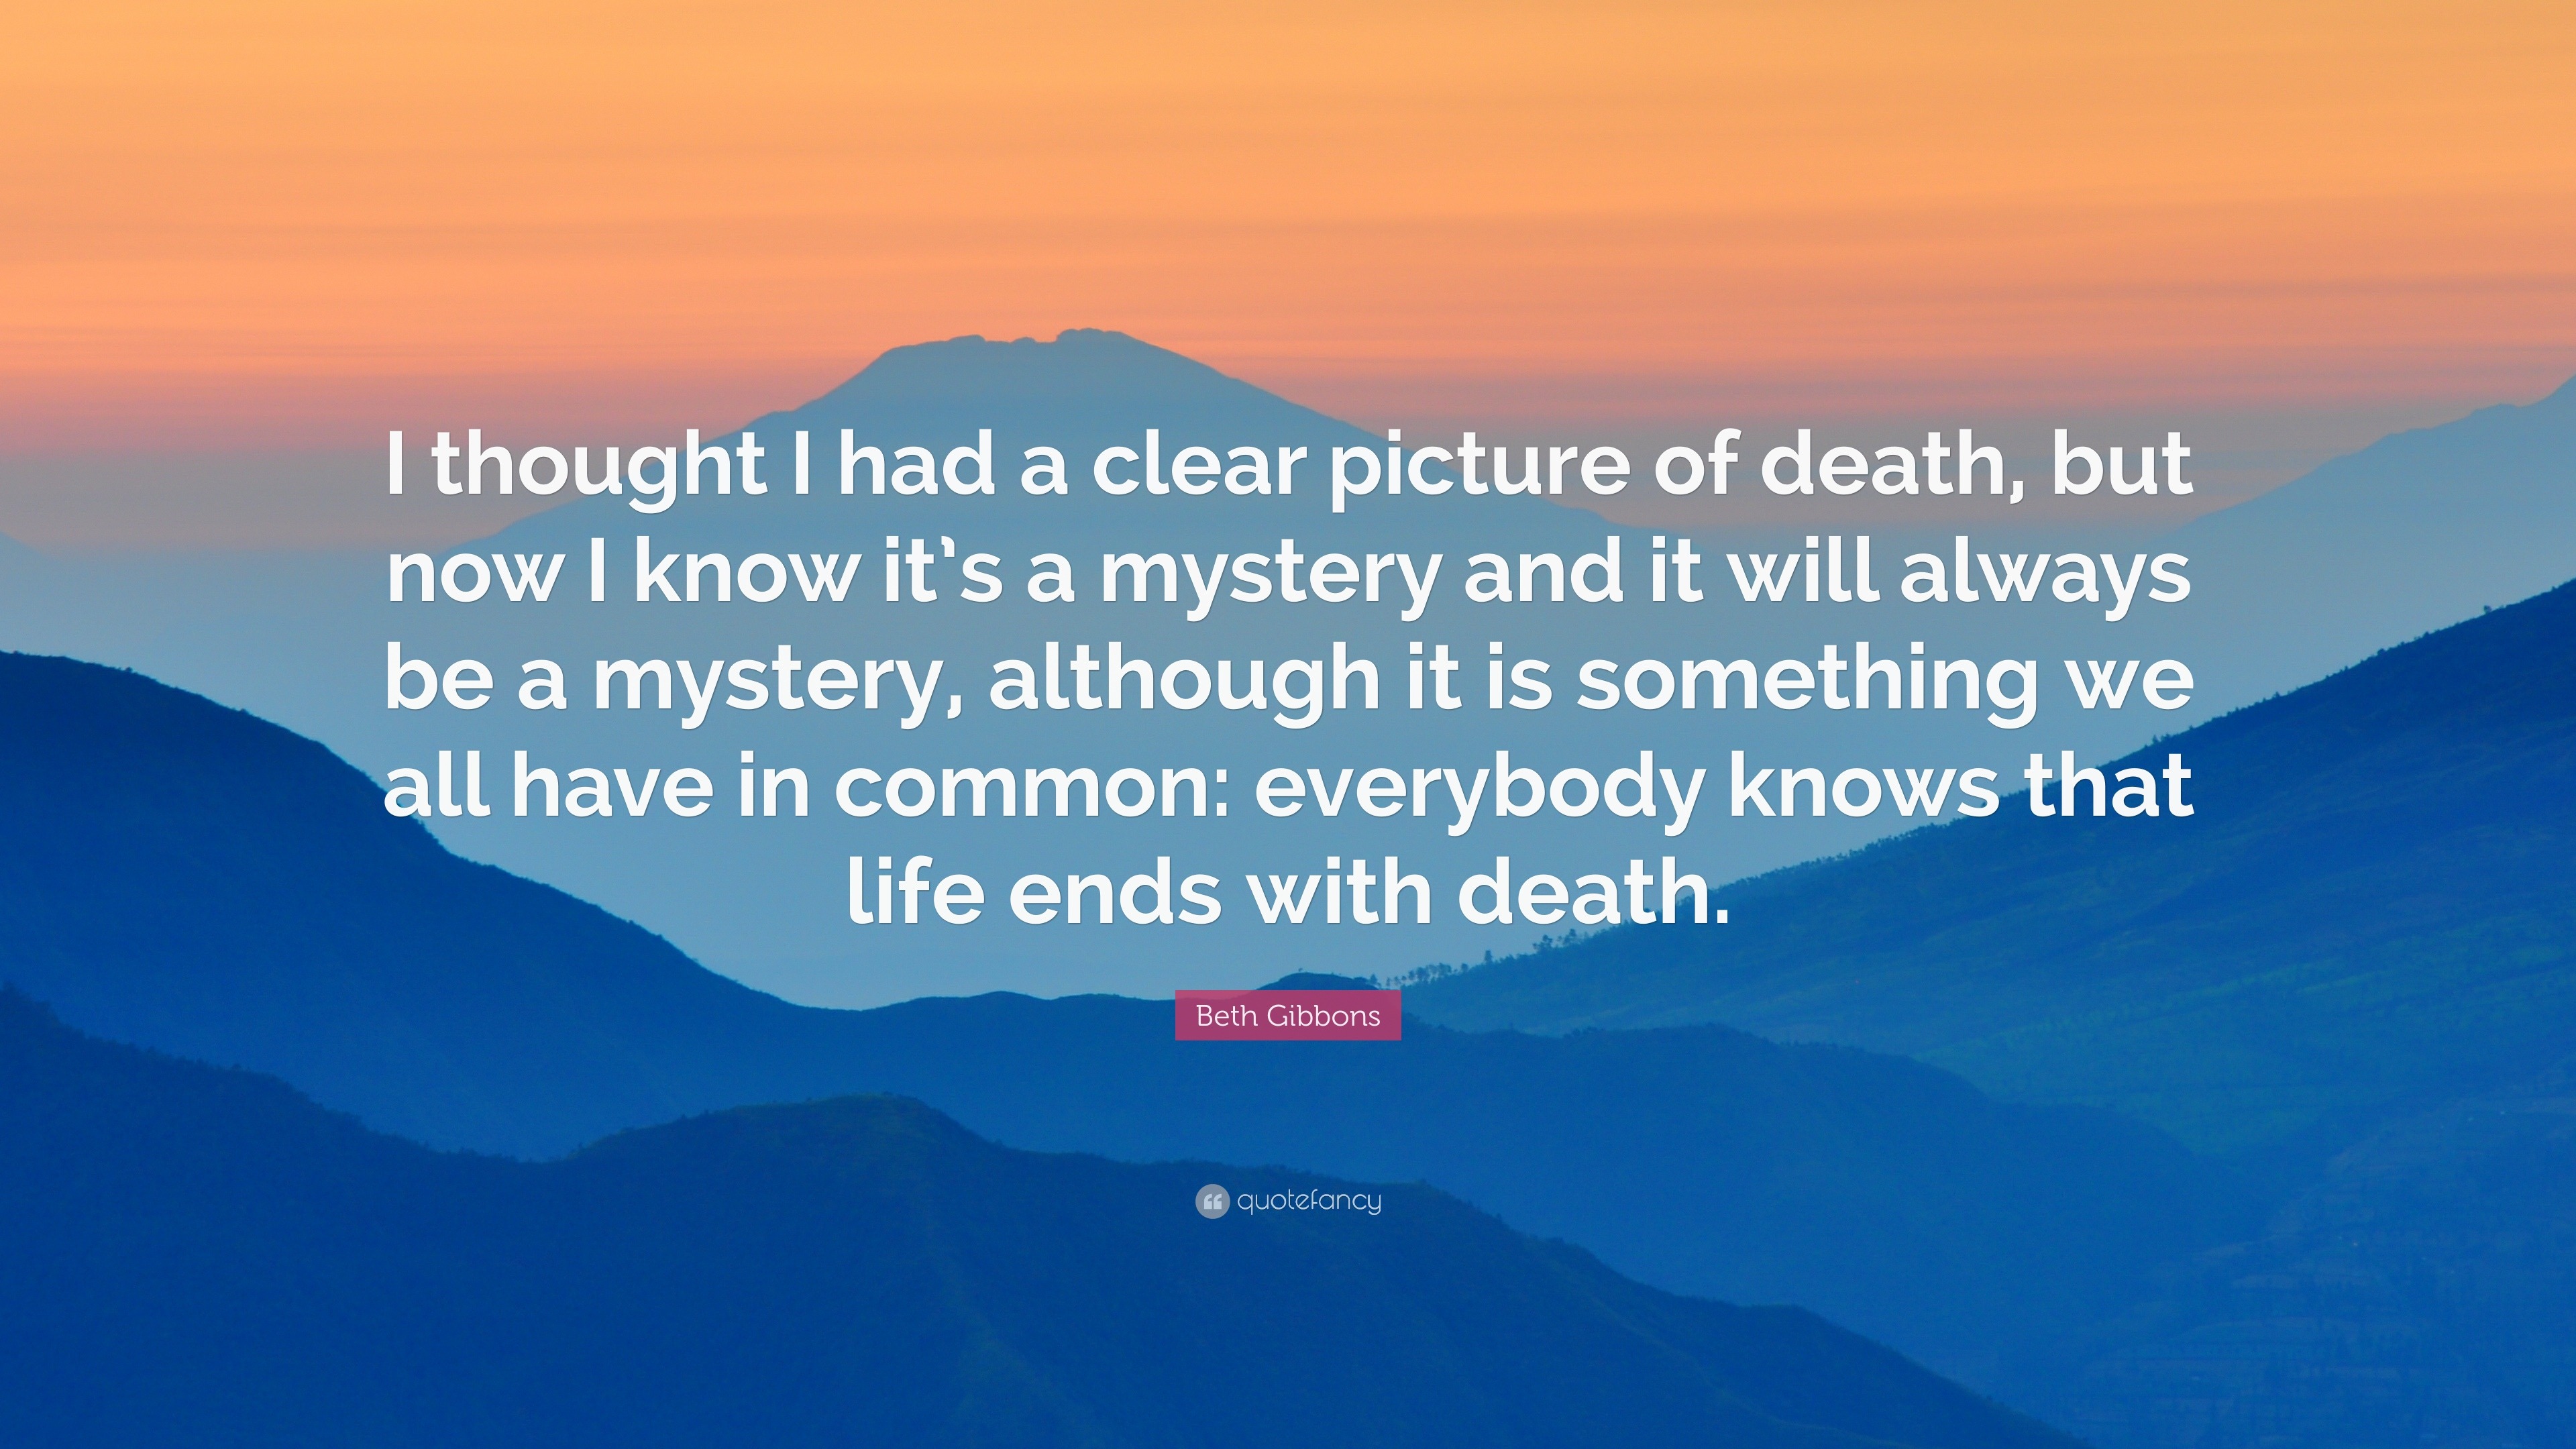 Beth Gibbons Quote: “I thought I had a clear picture of death, but now ...